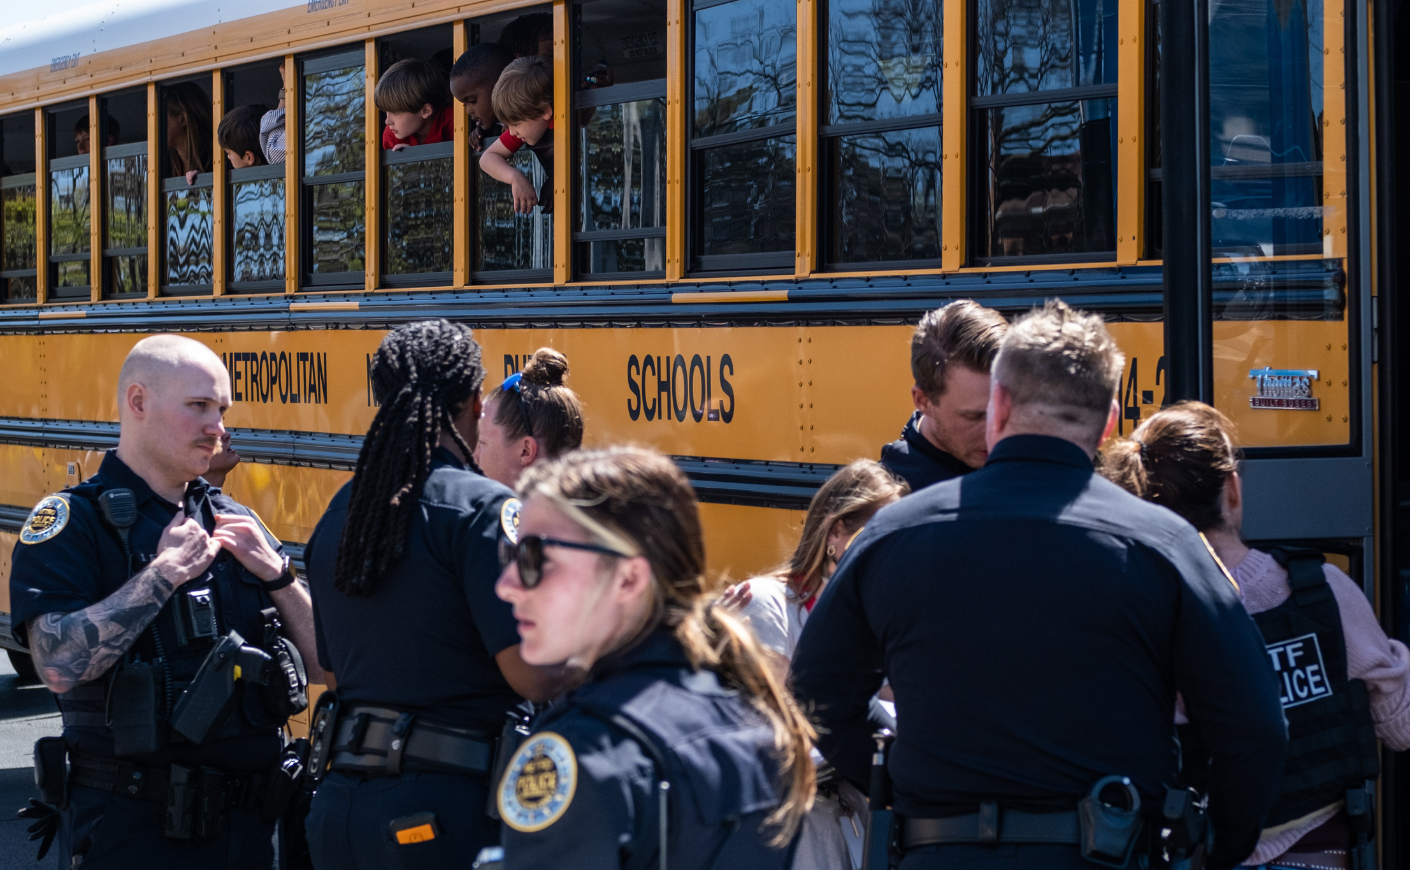 Police stand outside a school bus